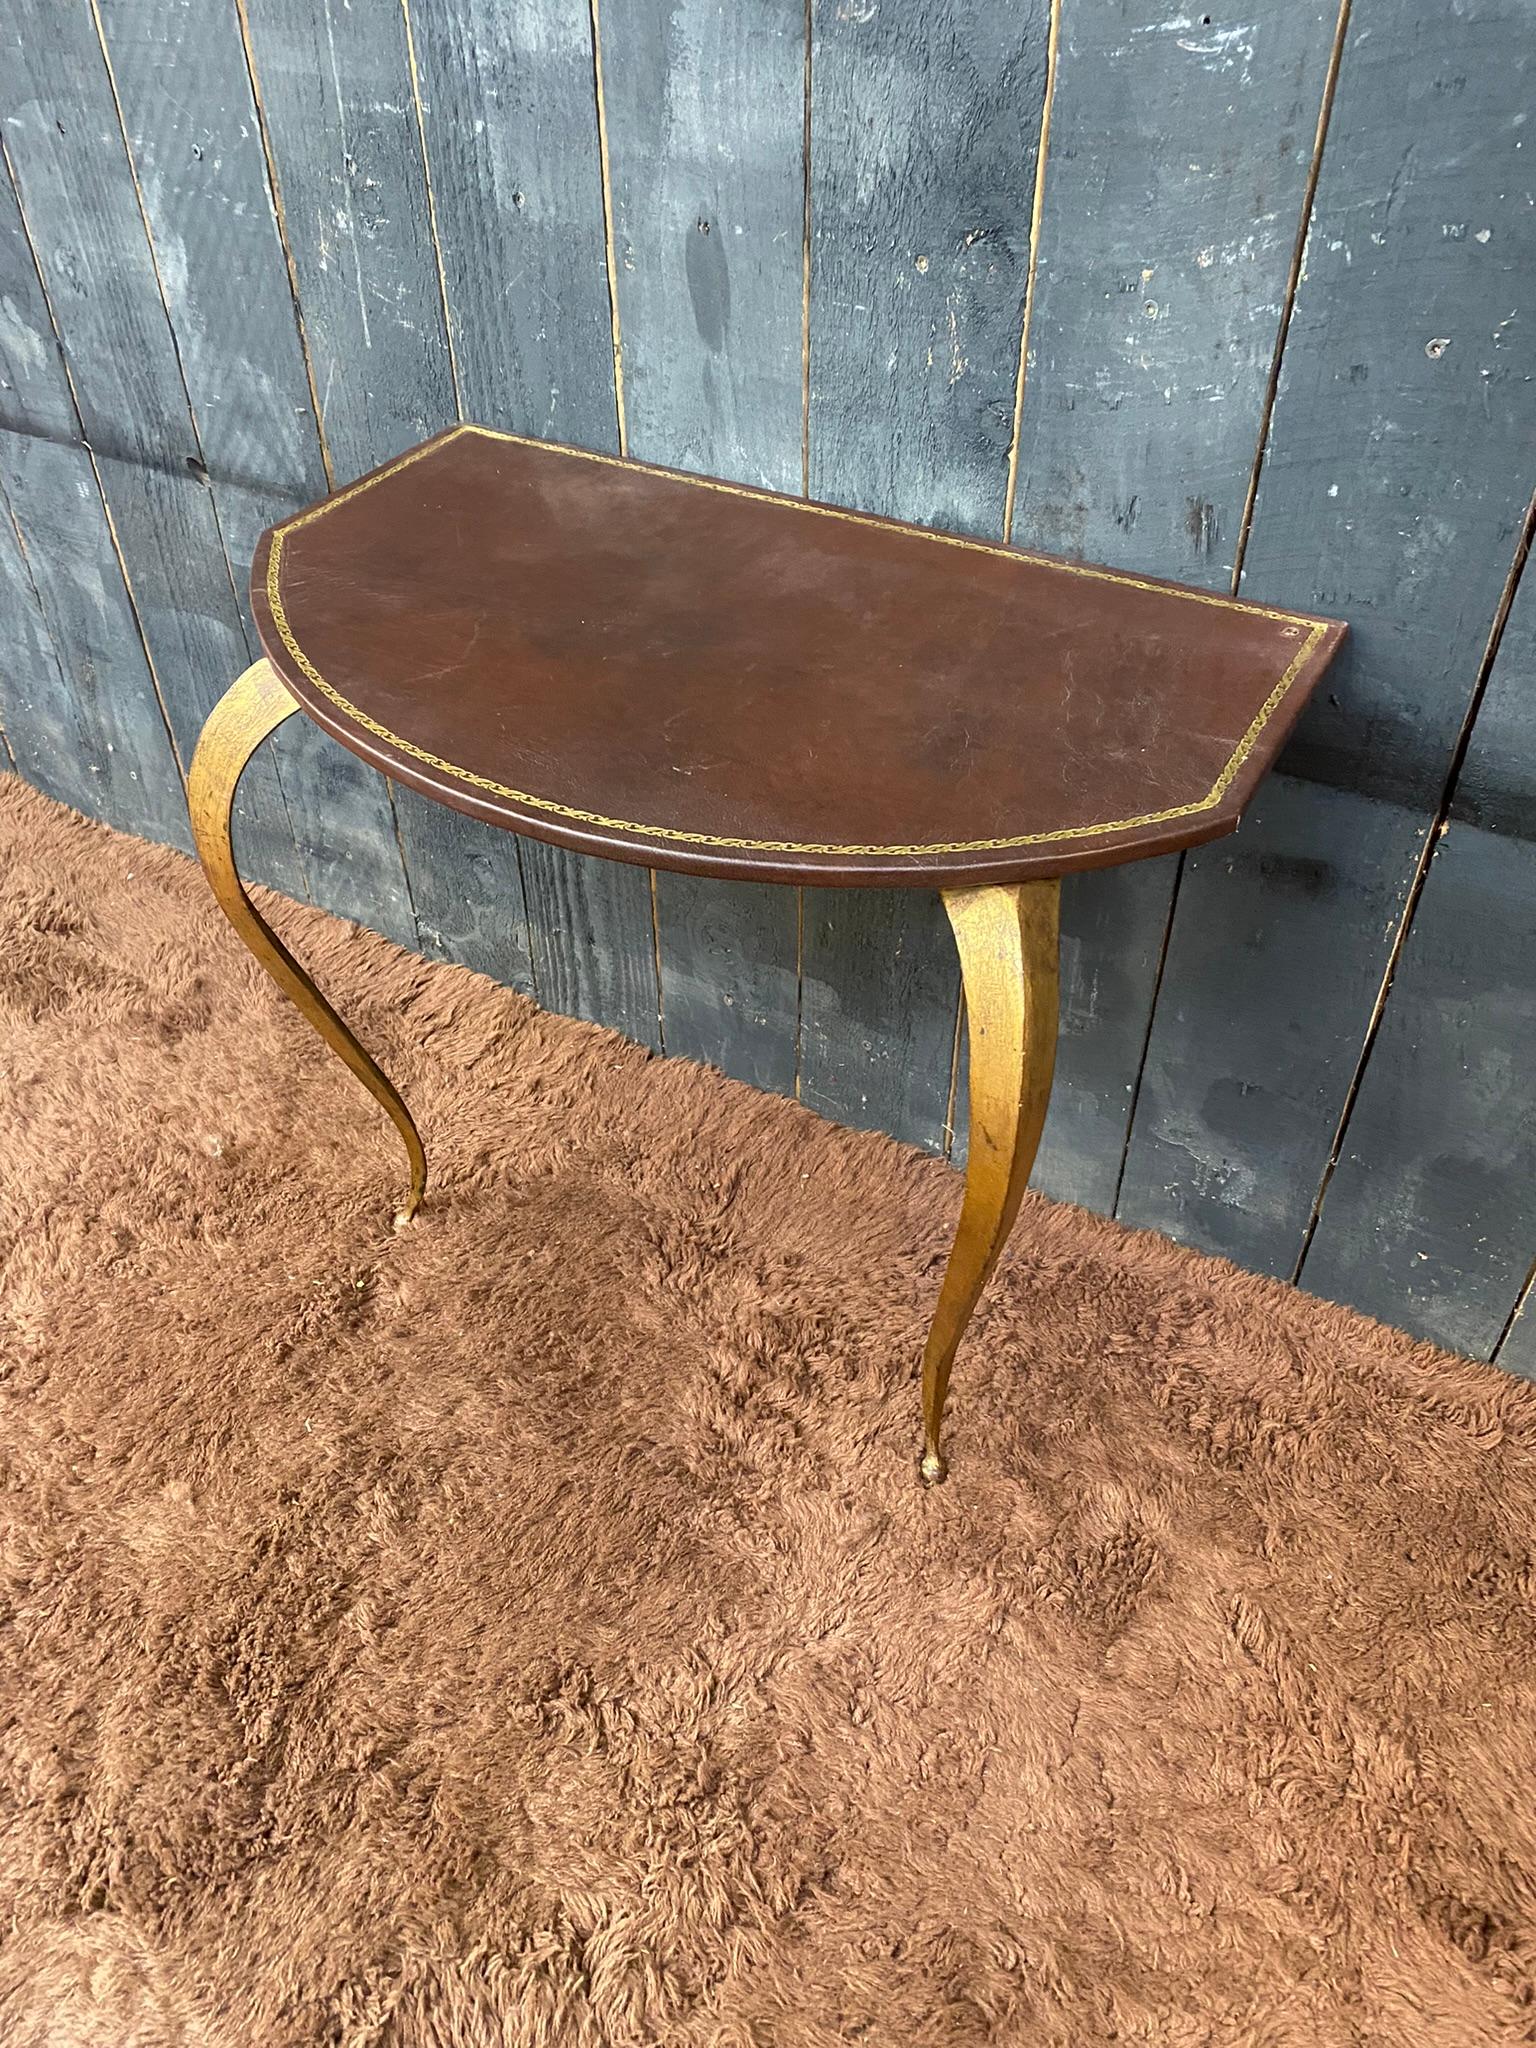 Small  neo classique Console in brass and faux leather circa 1950
Console to fix on the wall.
